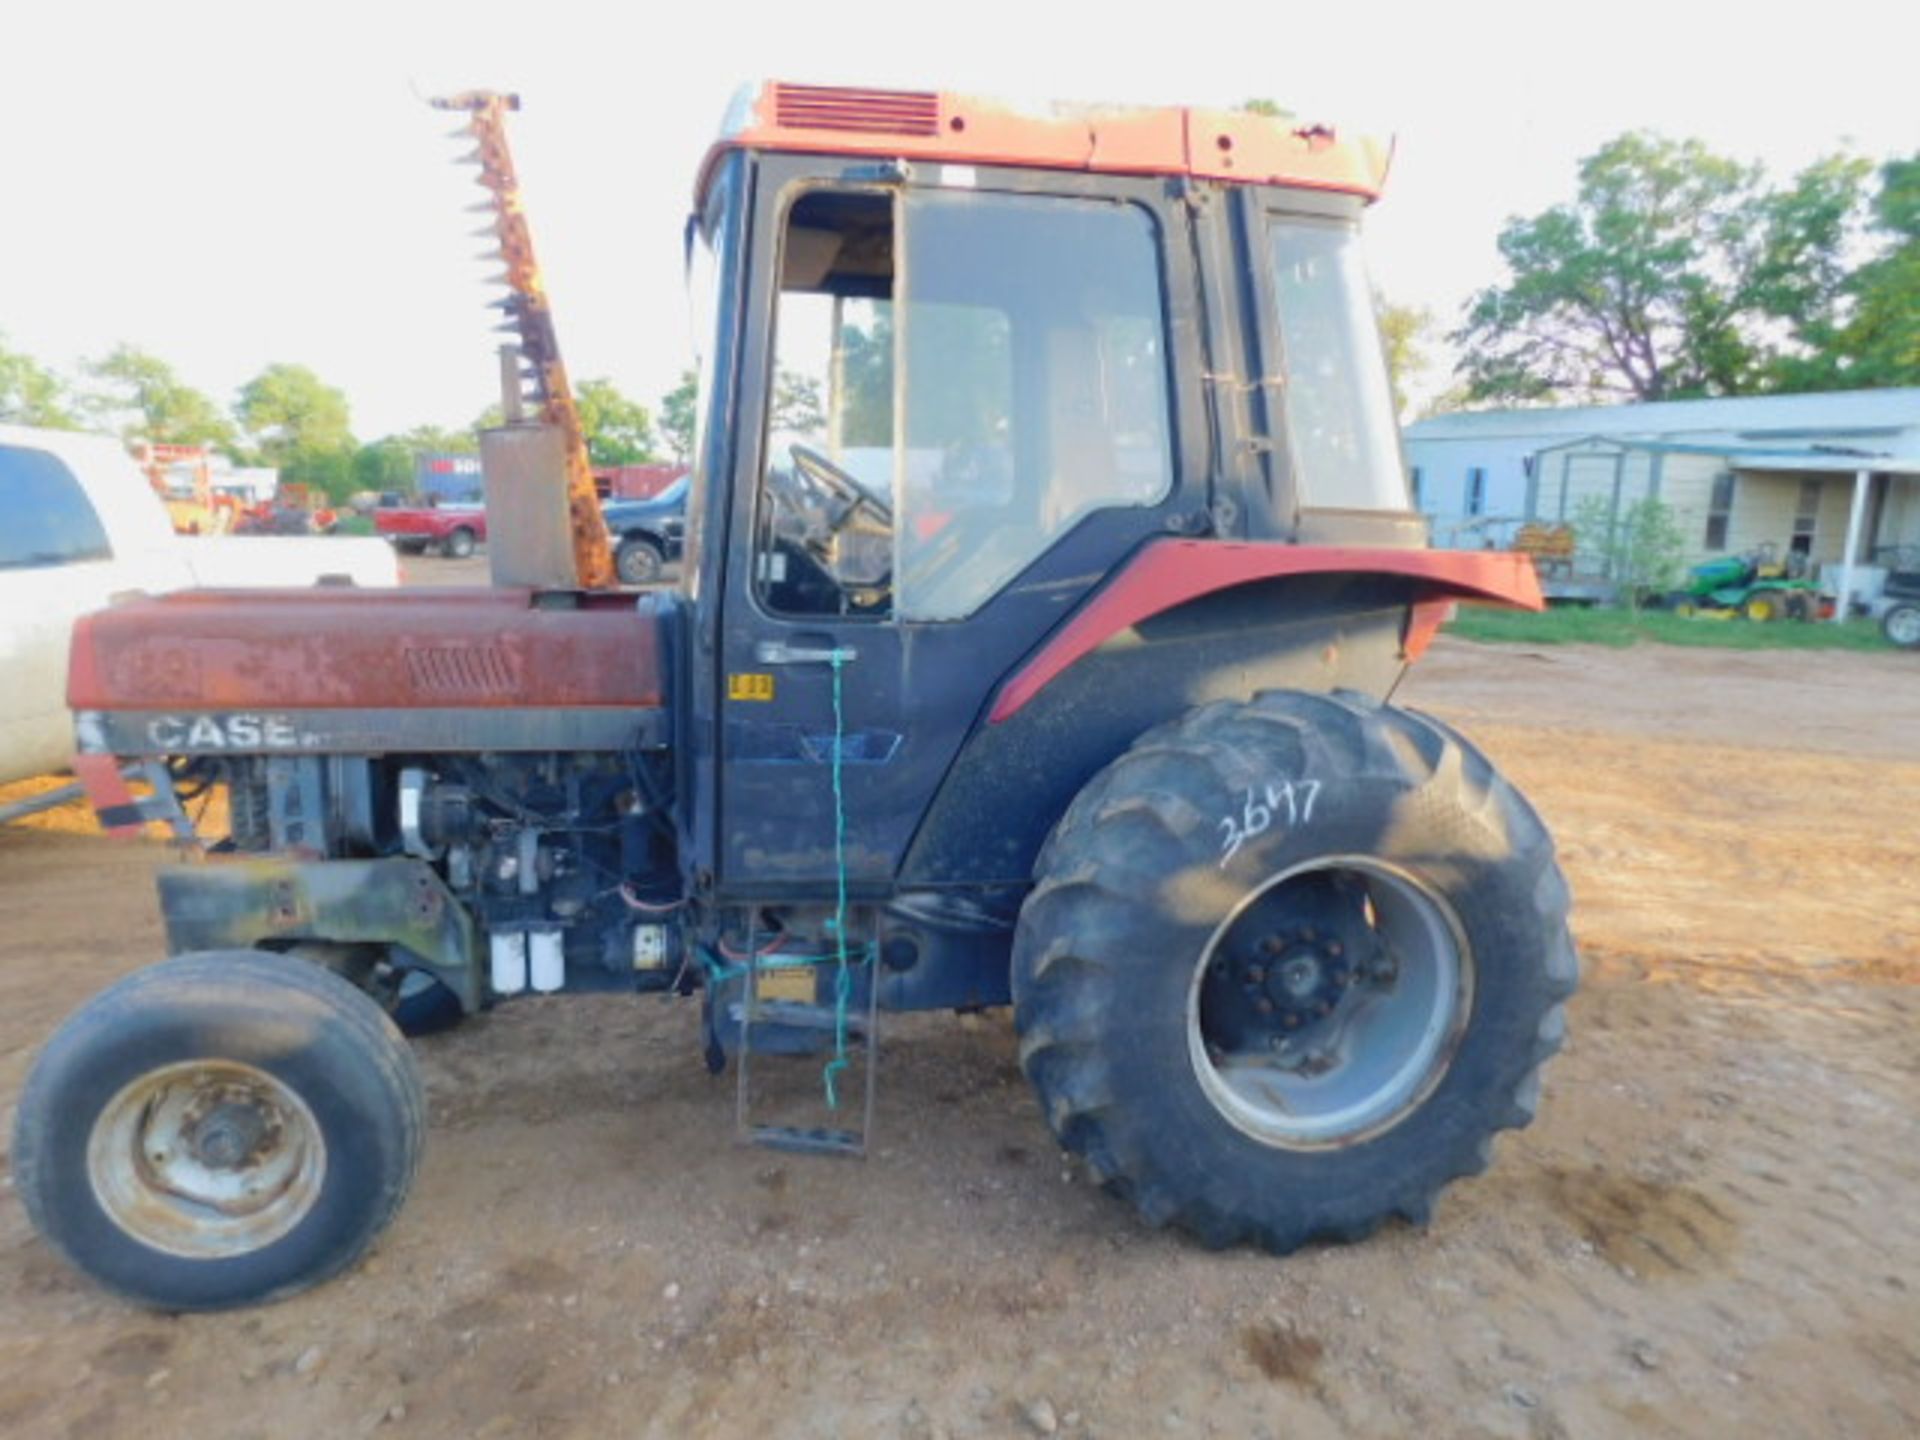 685 CASE IH CAB TRACTOR w/ MOWER ATTACHMENT ON SIDE